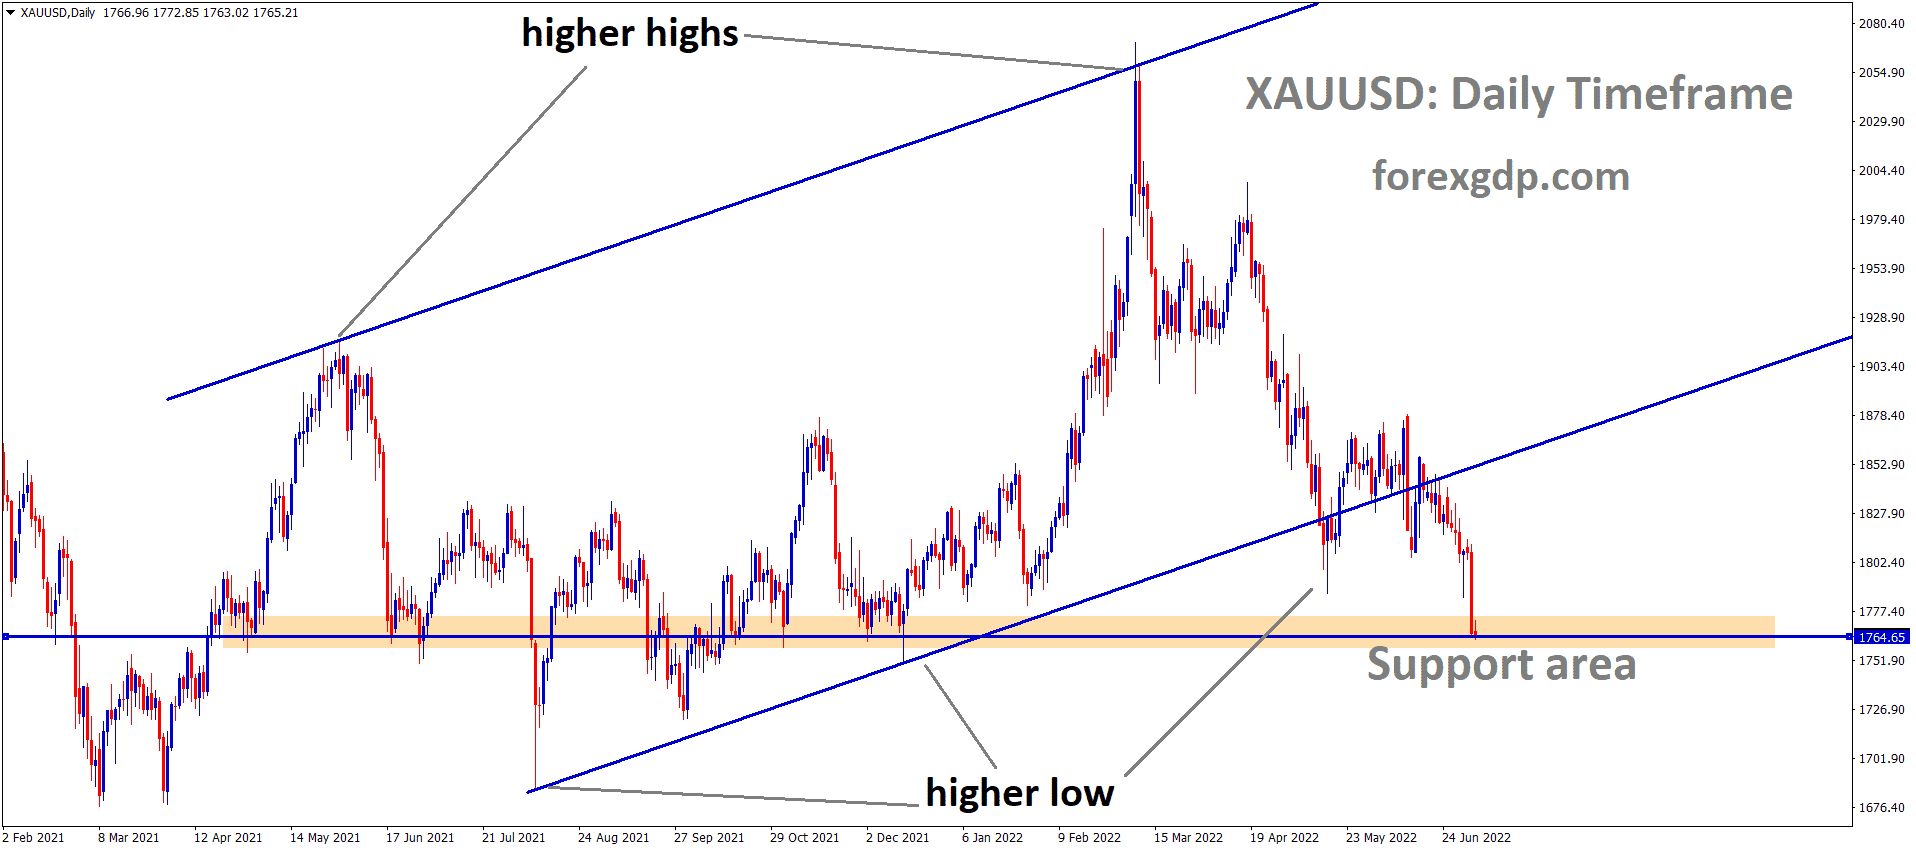 XAUUSD Gold price has broken the Descending channel and the Market has reached the Horizontal support area.